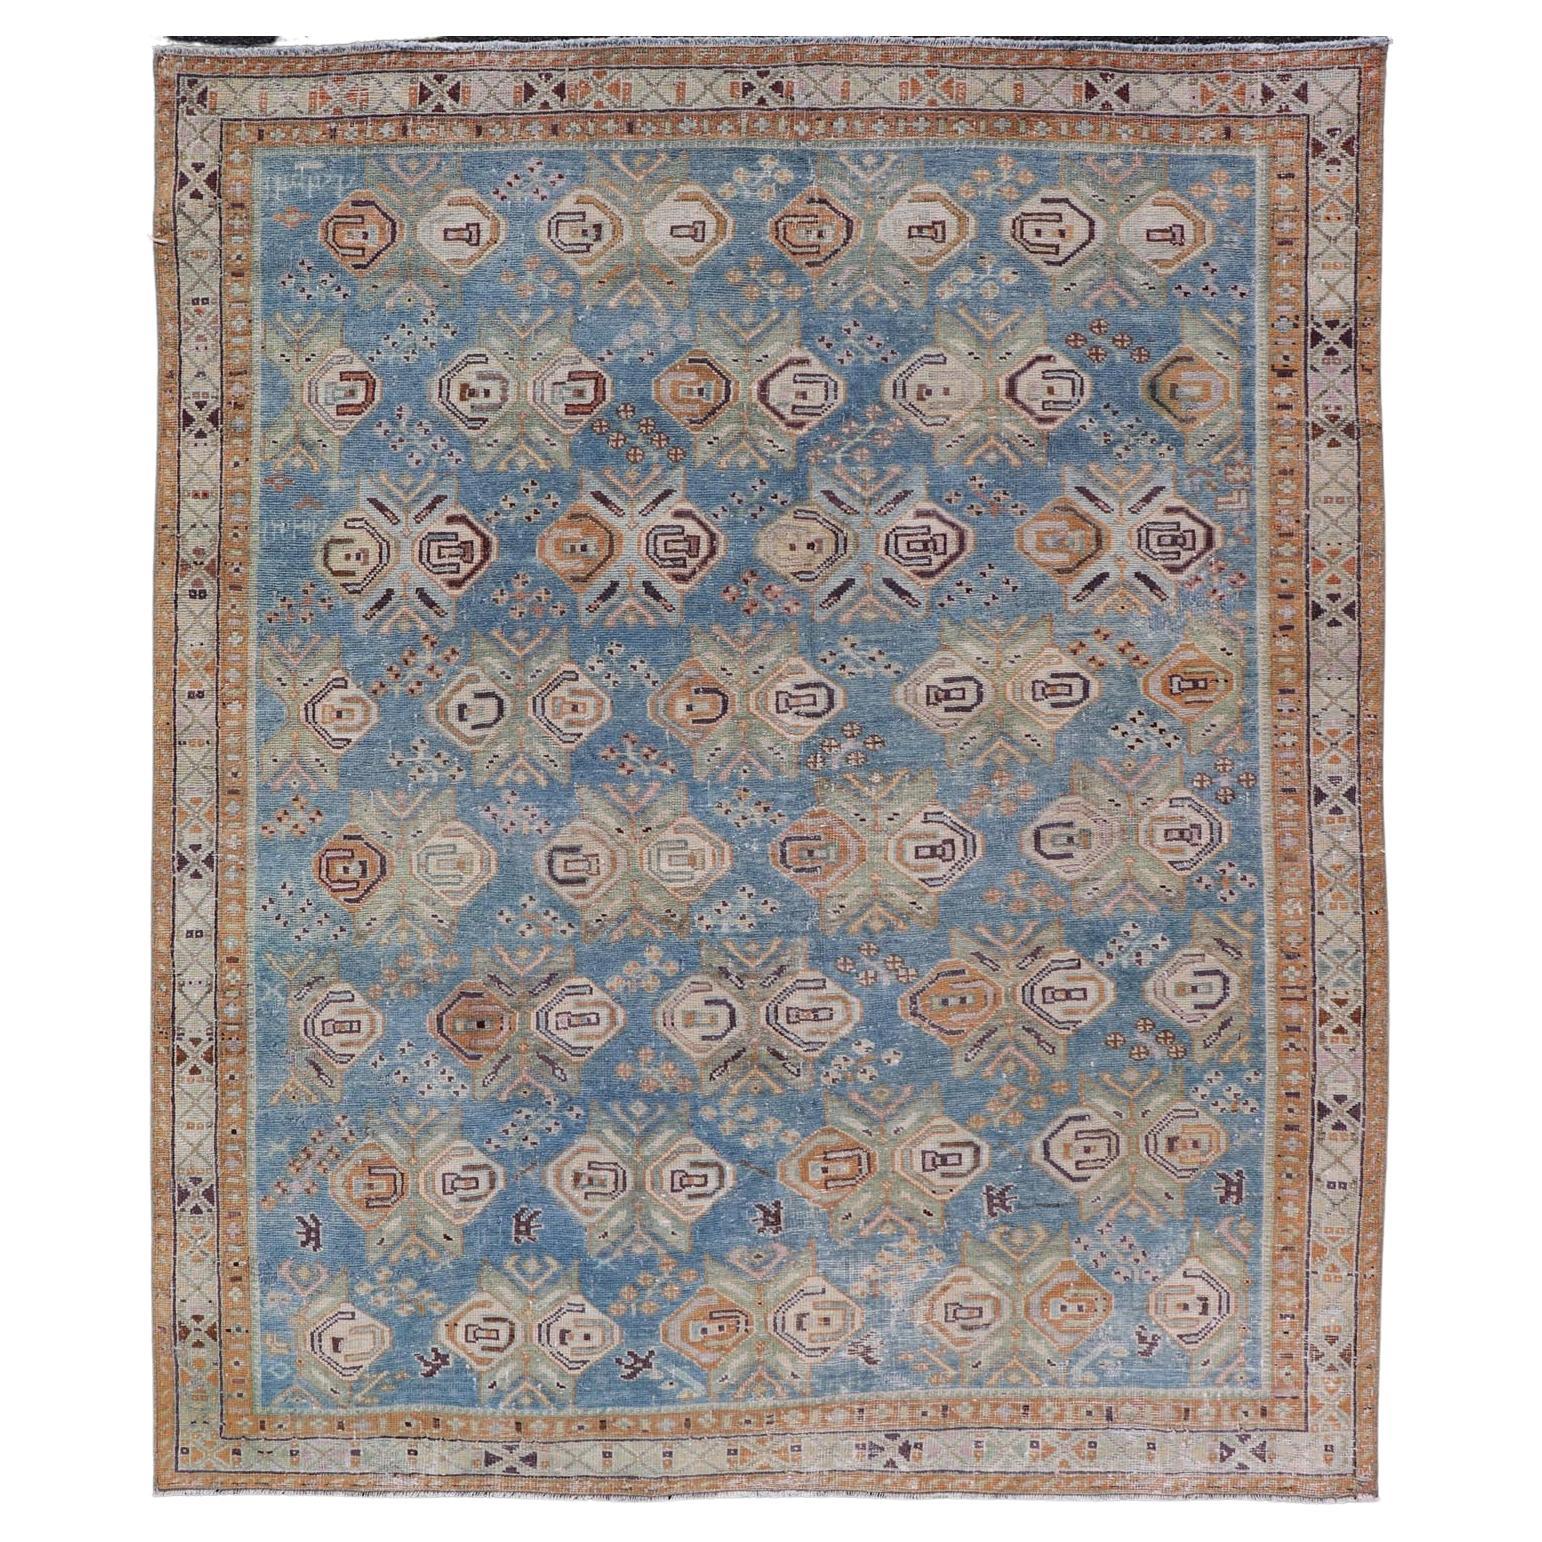 Persian Antique Afshar Rug in Light Blue Background With Tribal Floral Motifs  For Sale